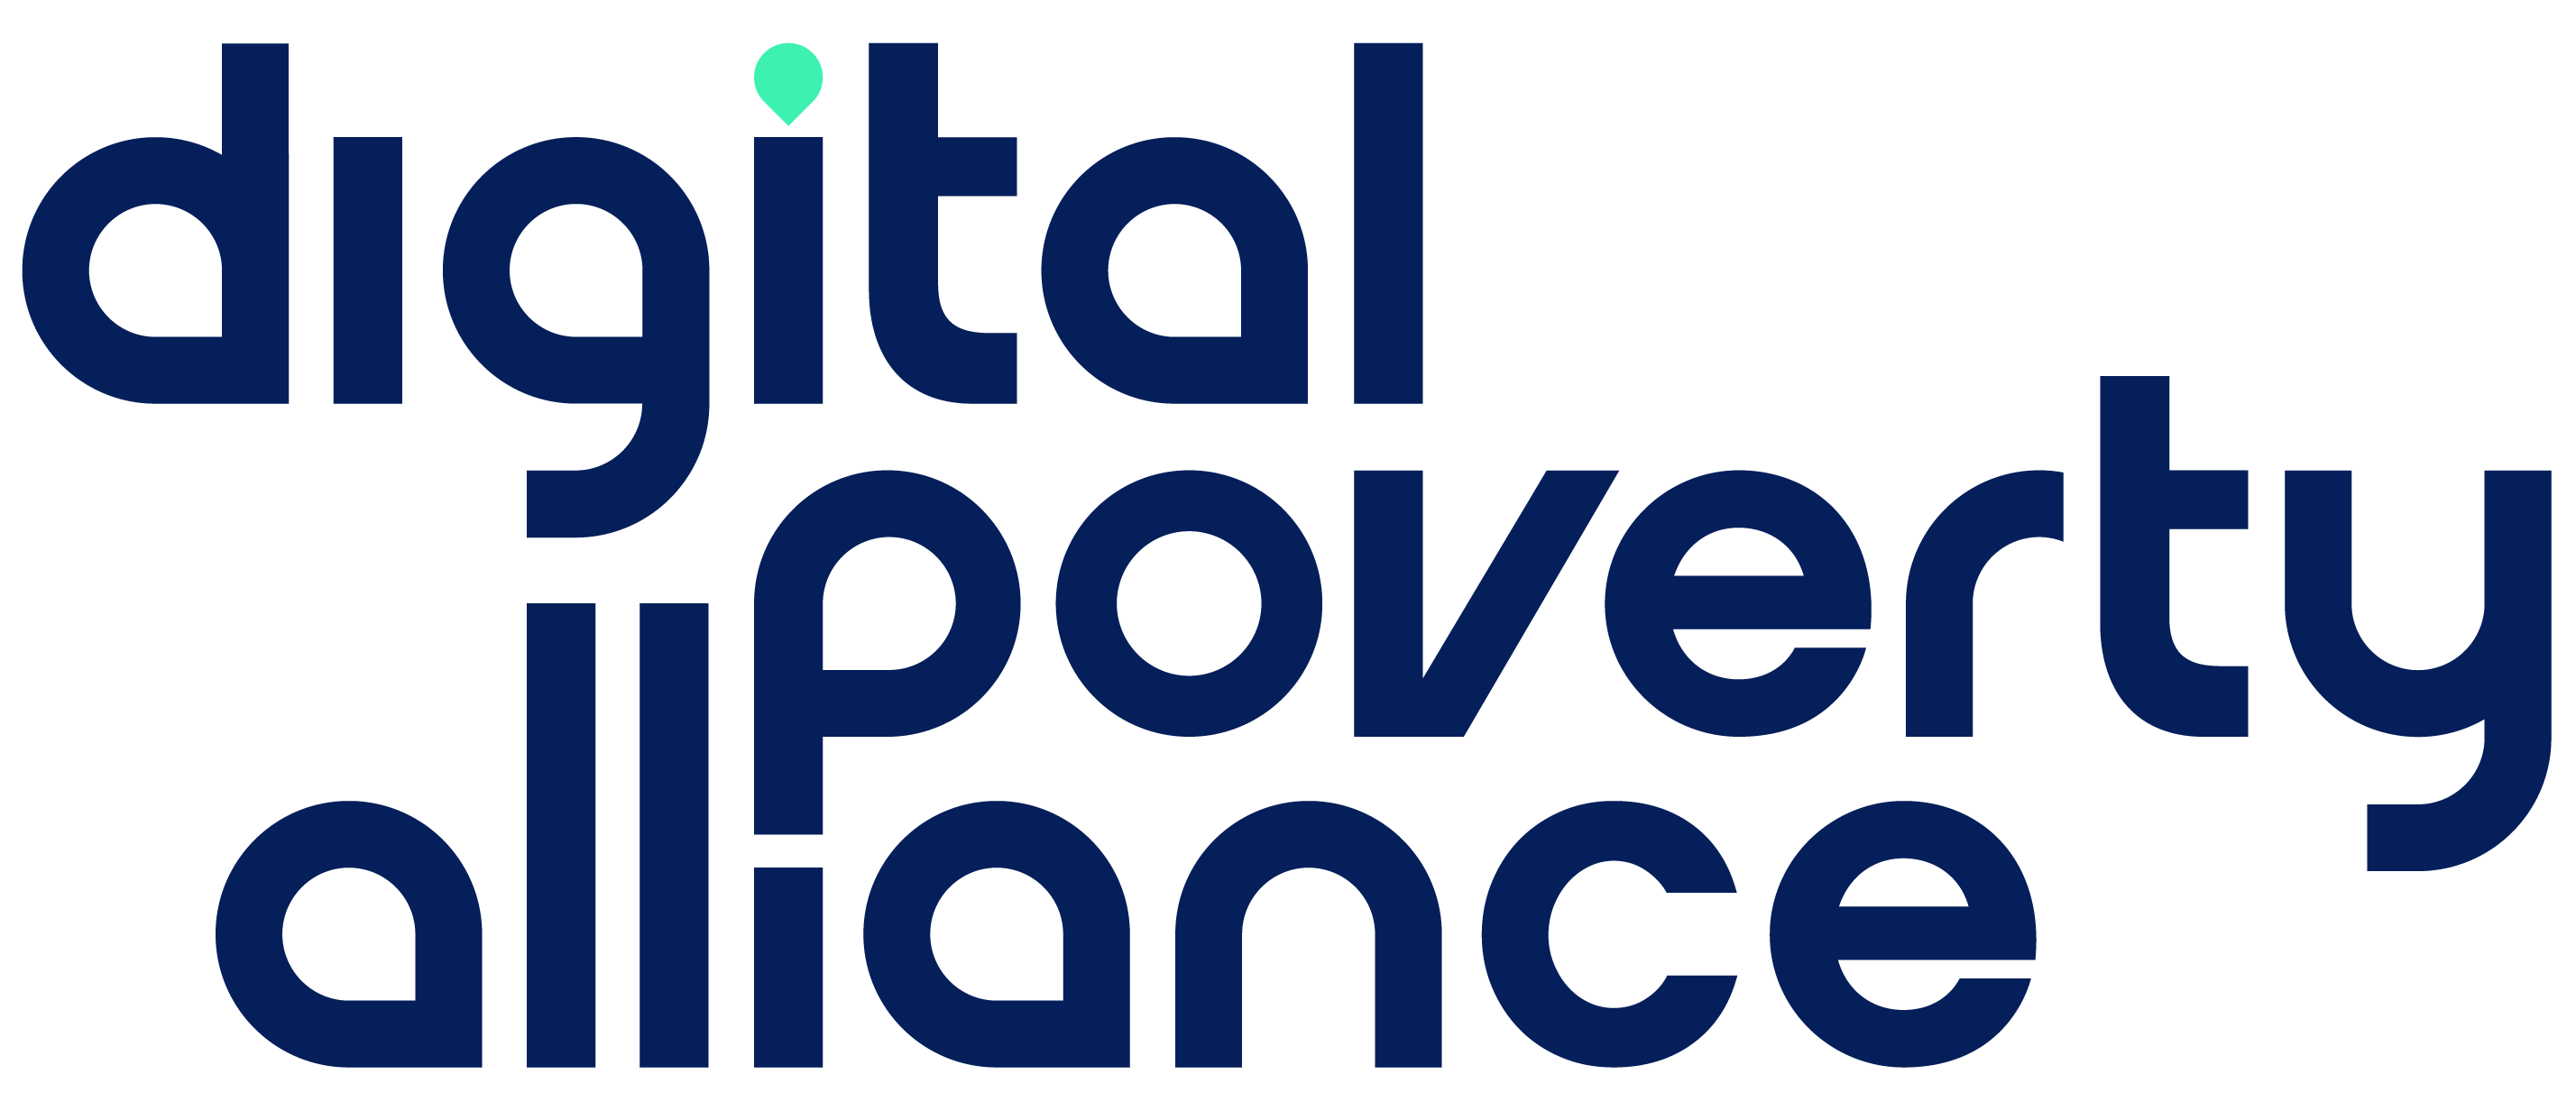 The text reads 'Digital Poverty Alliance' in black font.